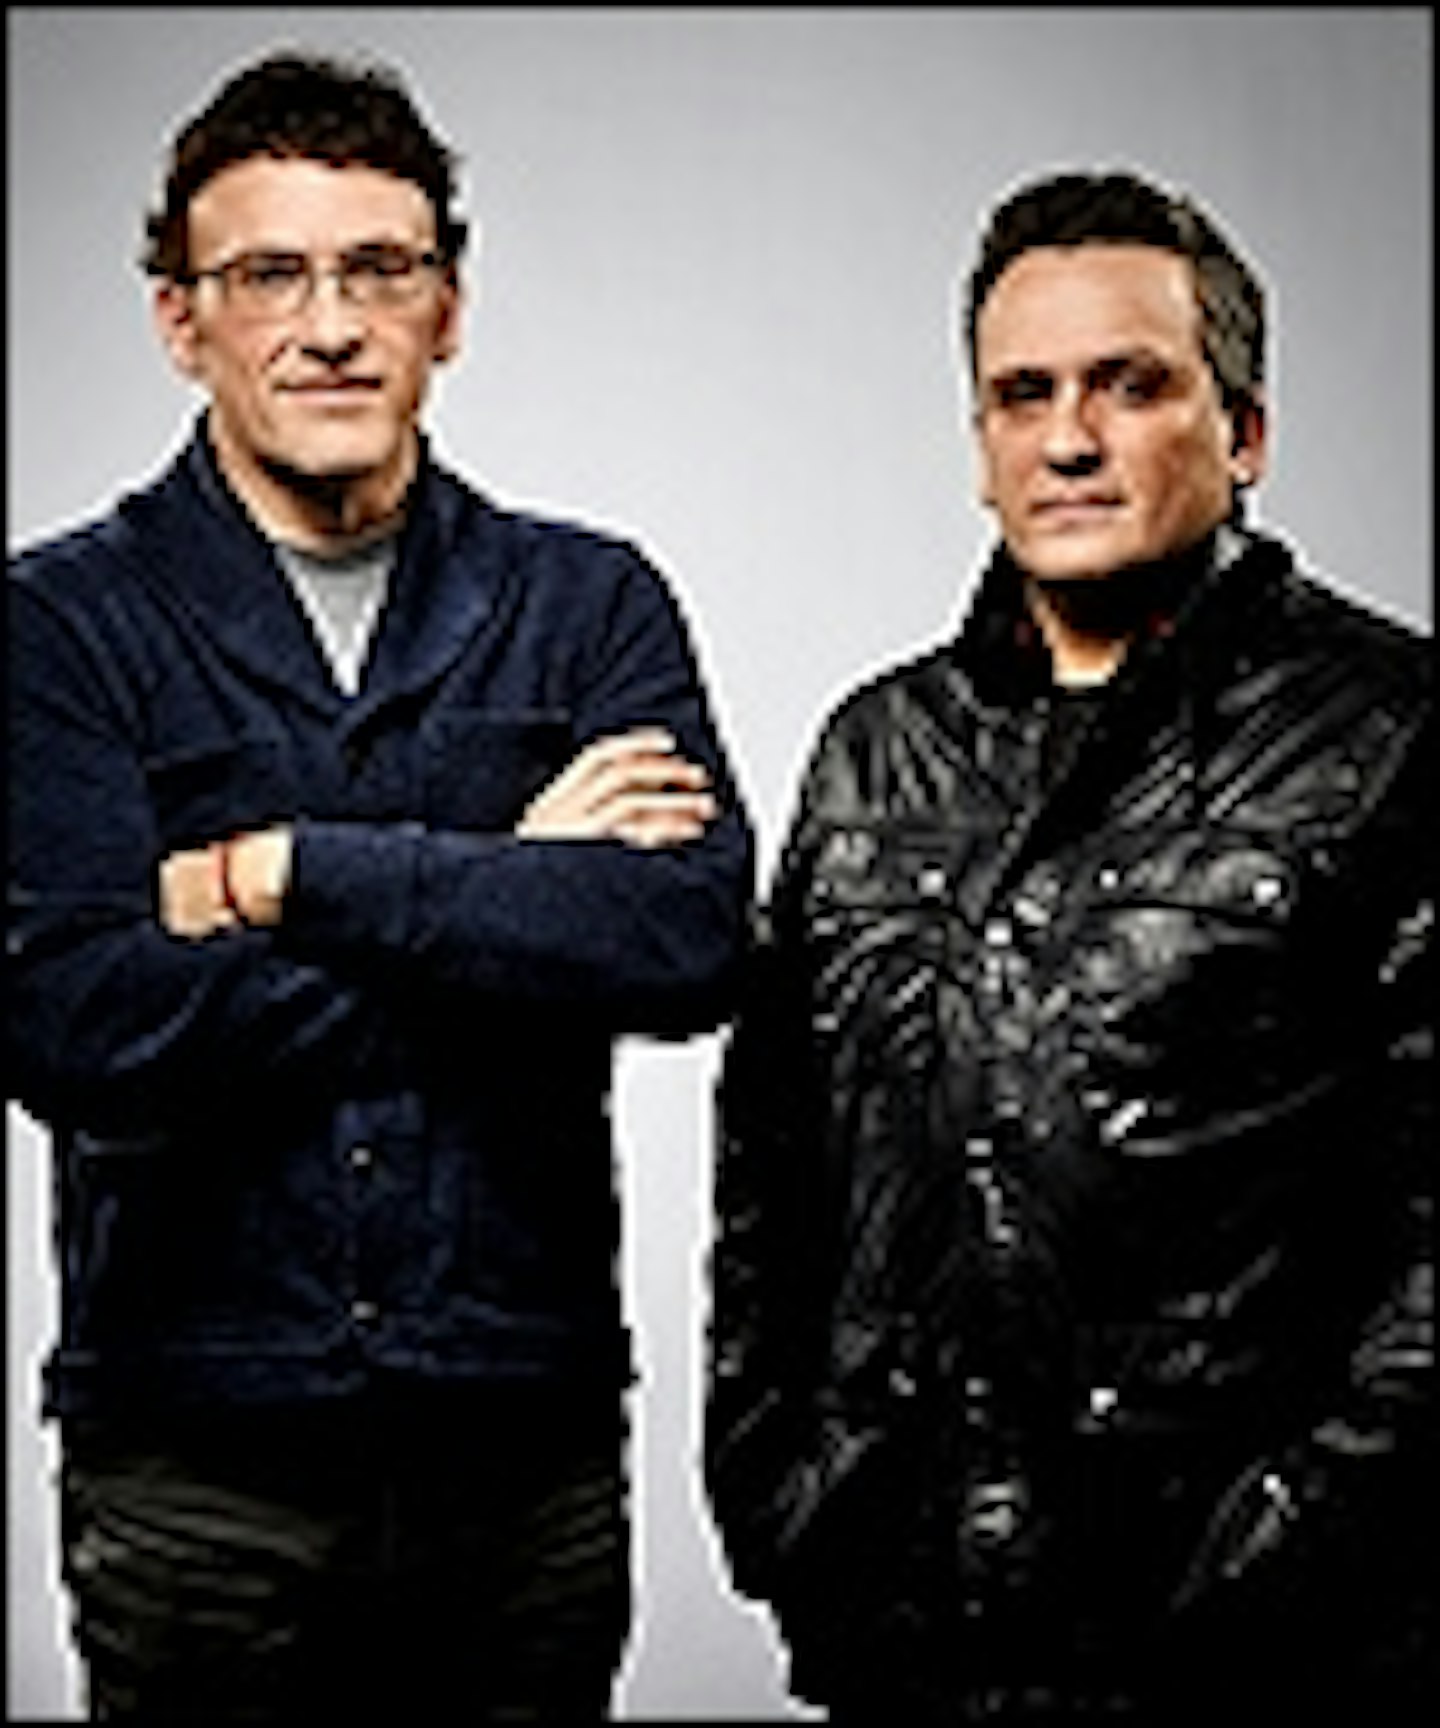 Joe And Anthony Russo Confirmed For Avengers: Infinity War